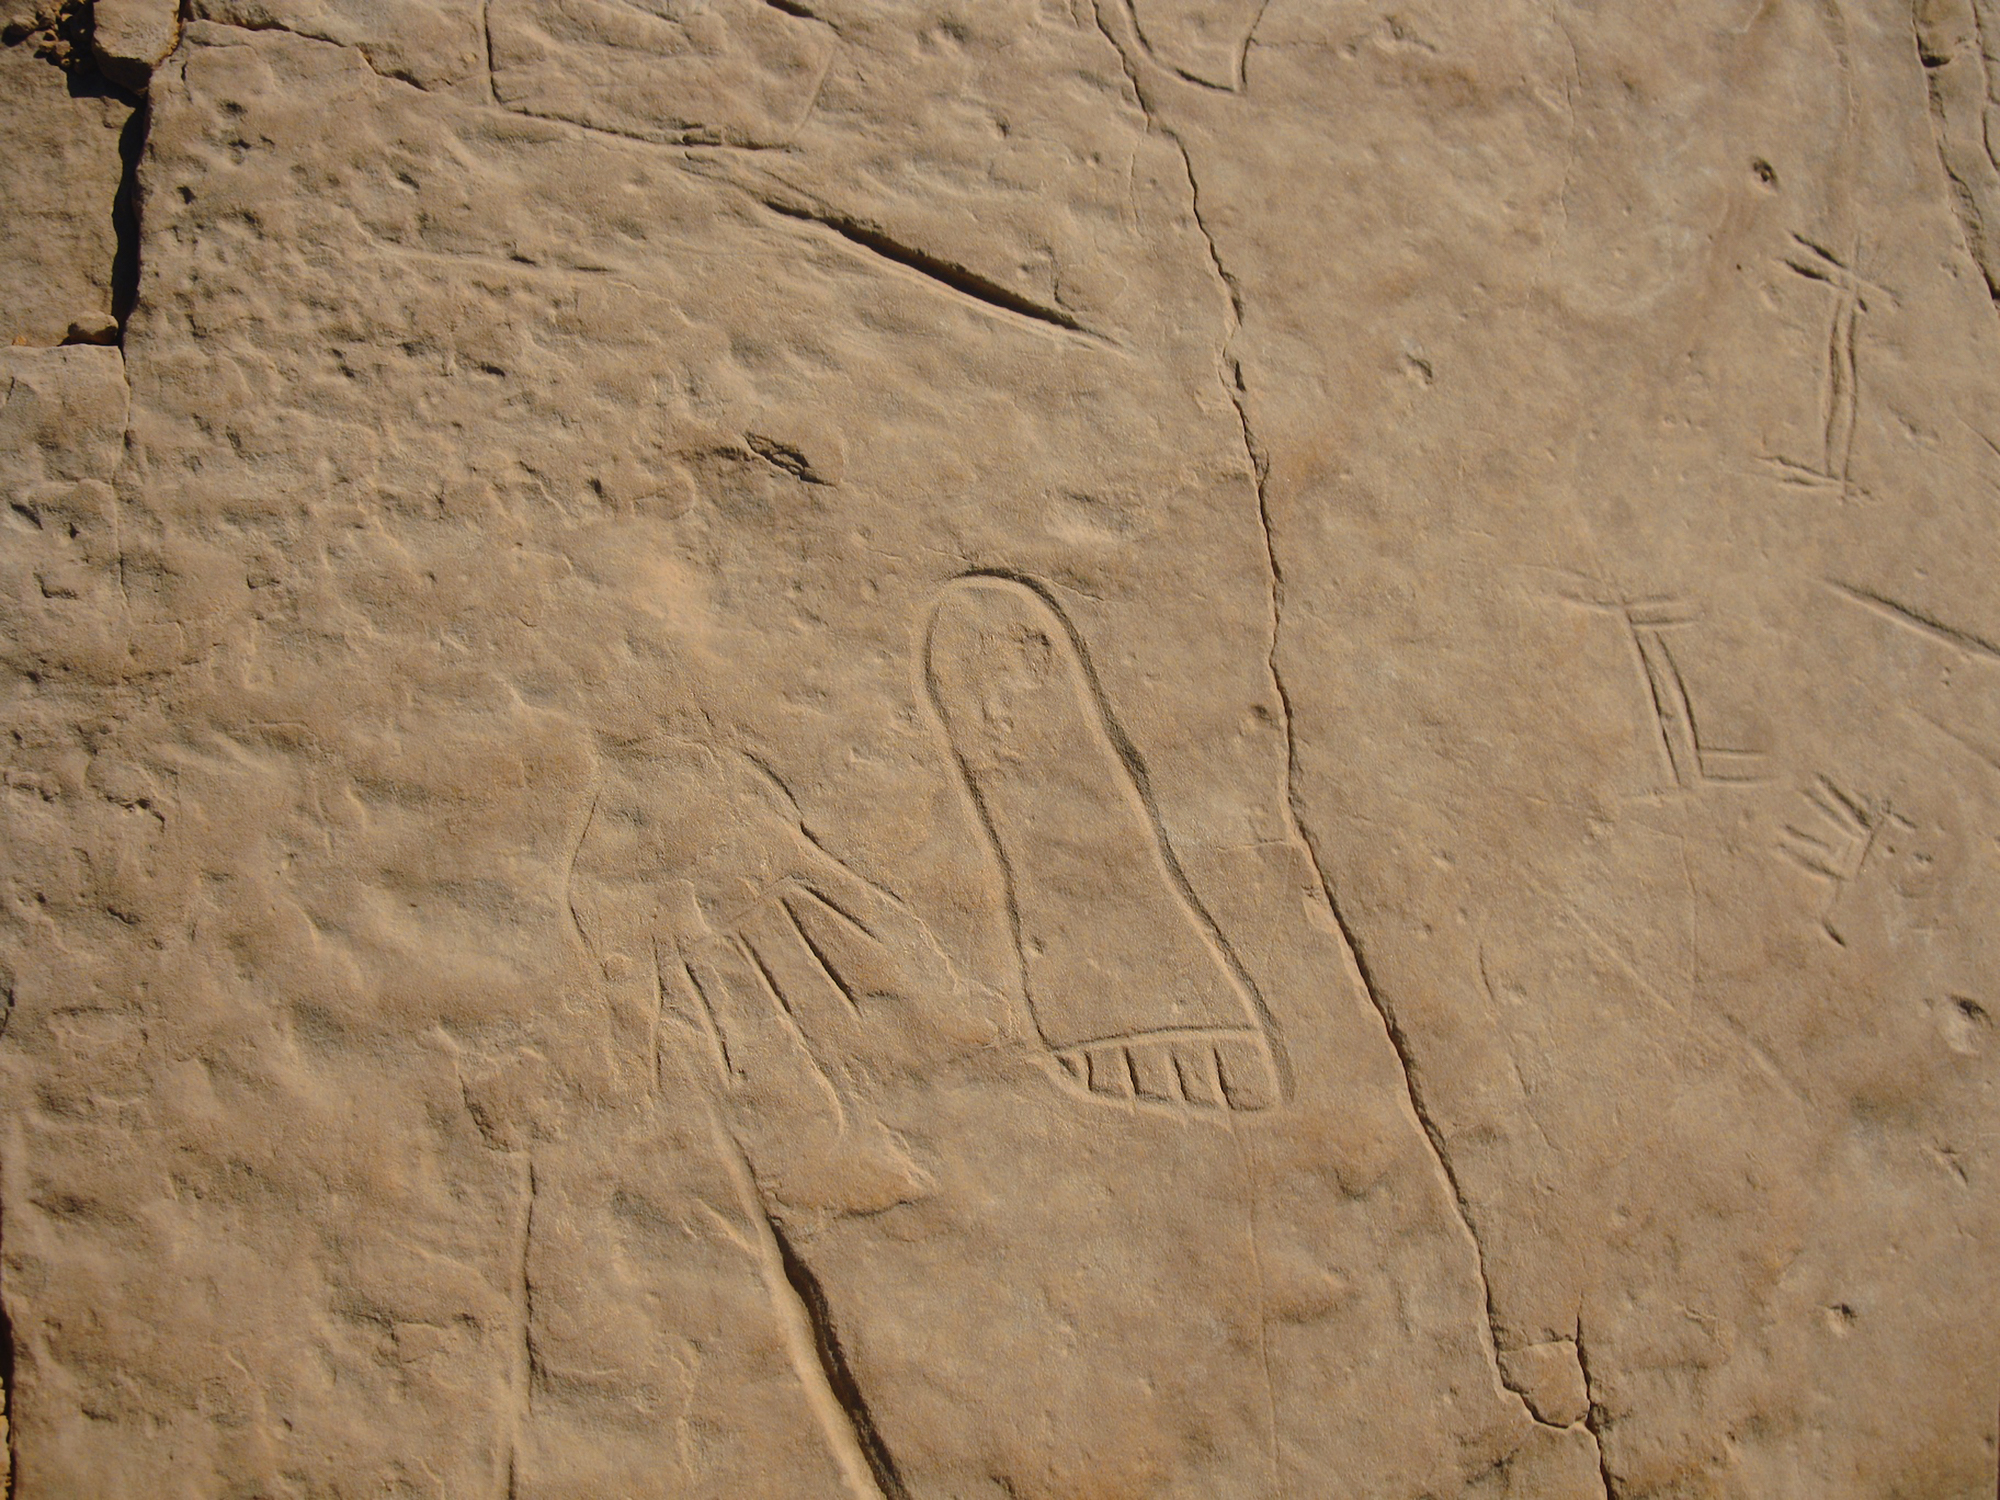 Rock Art Hand and foot, possibly belonging to the same individual, incised on a sandstone massif in Egypt’s Western Deserts Archaeology Egypt